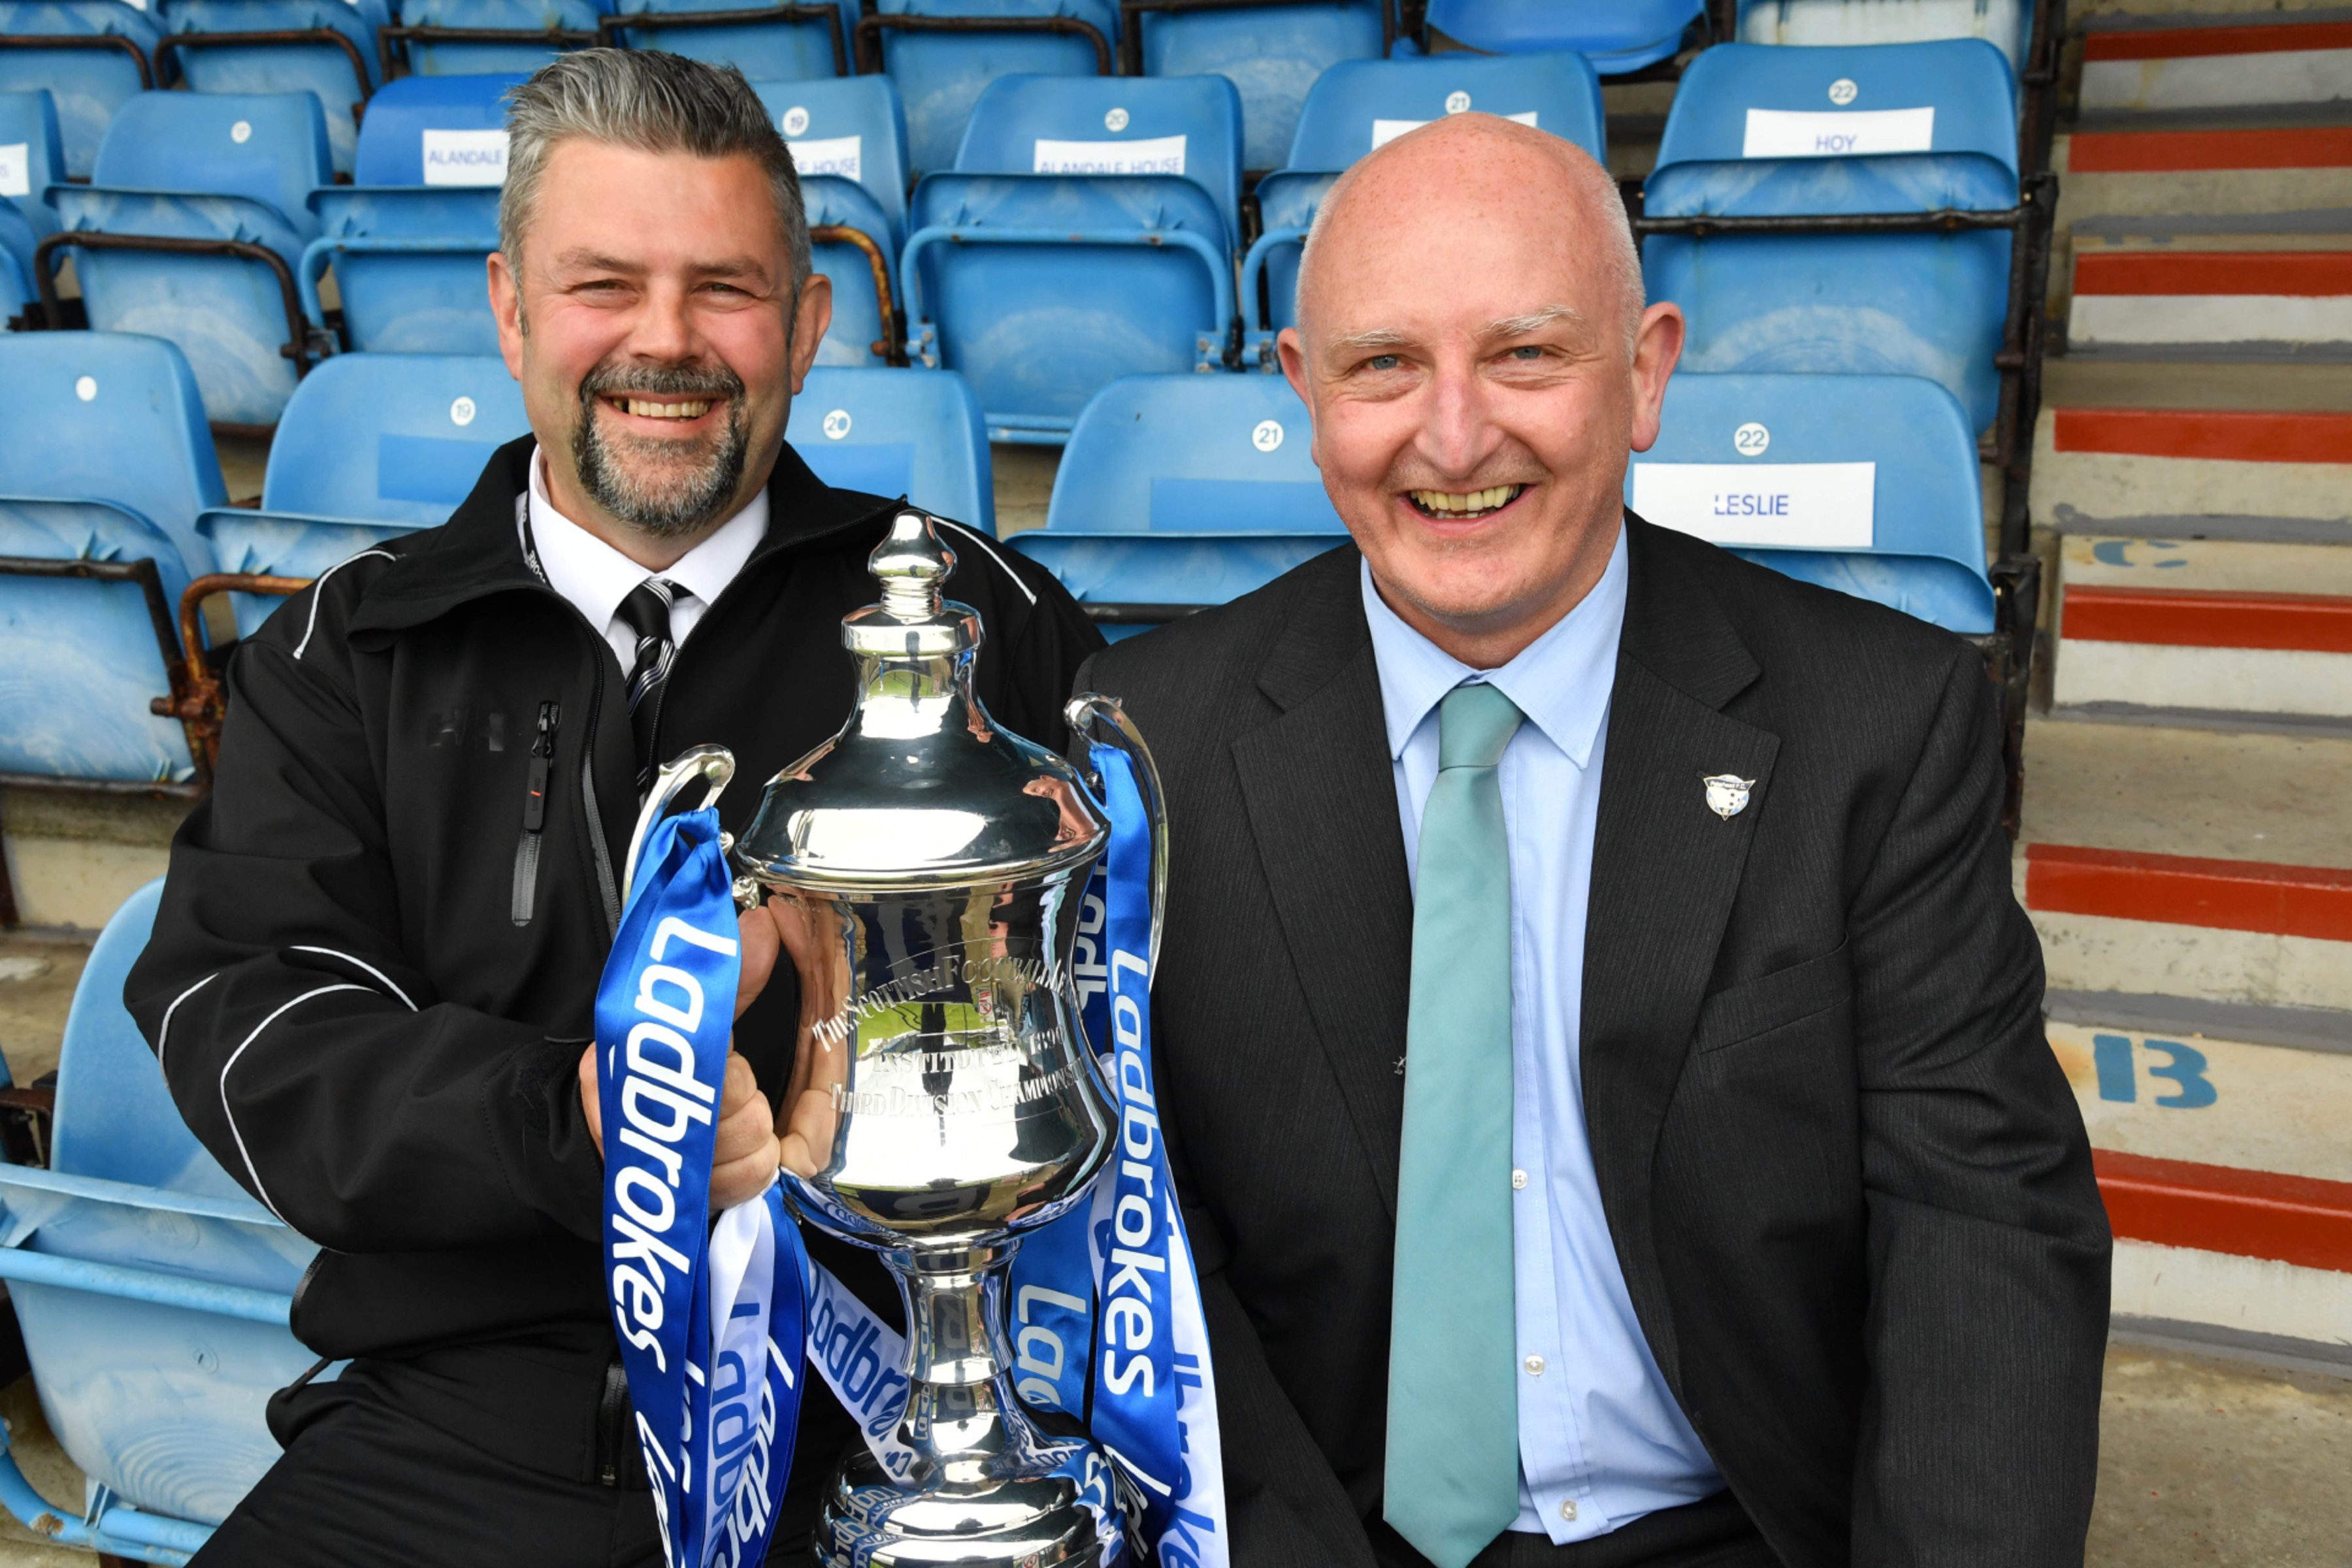 PETERHEAD FC CHIEF EXECUTIVE MARTIN JOHNSTON (R) AND CONRAD RITCHIE FROM SCORE WITH THE LEAGUE 2 TROPHY.